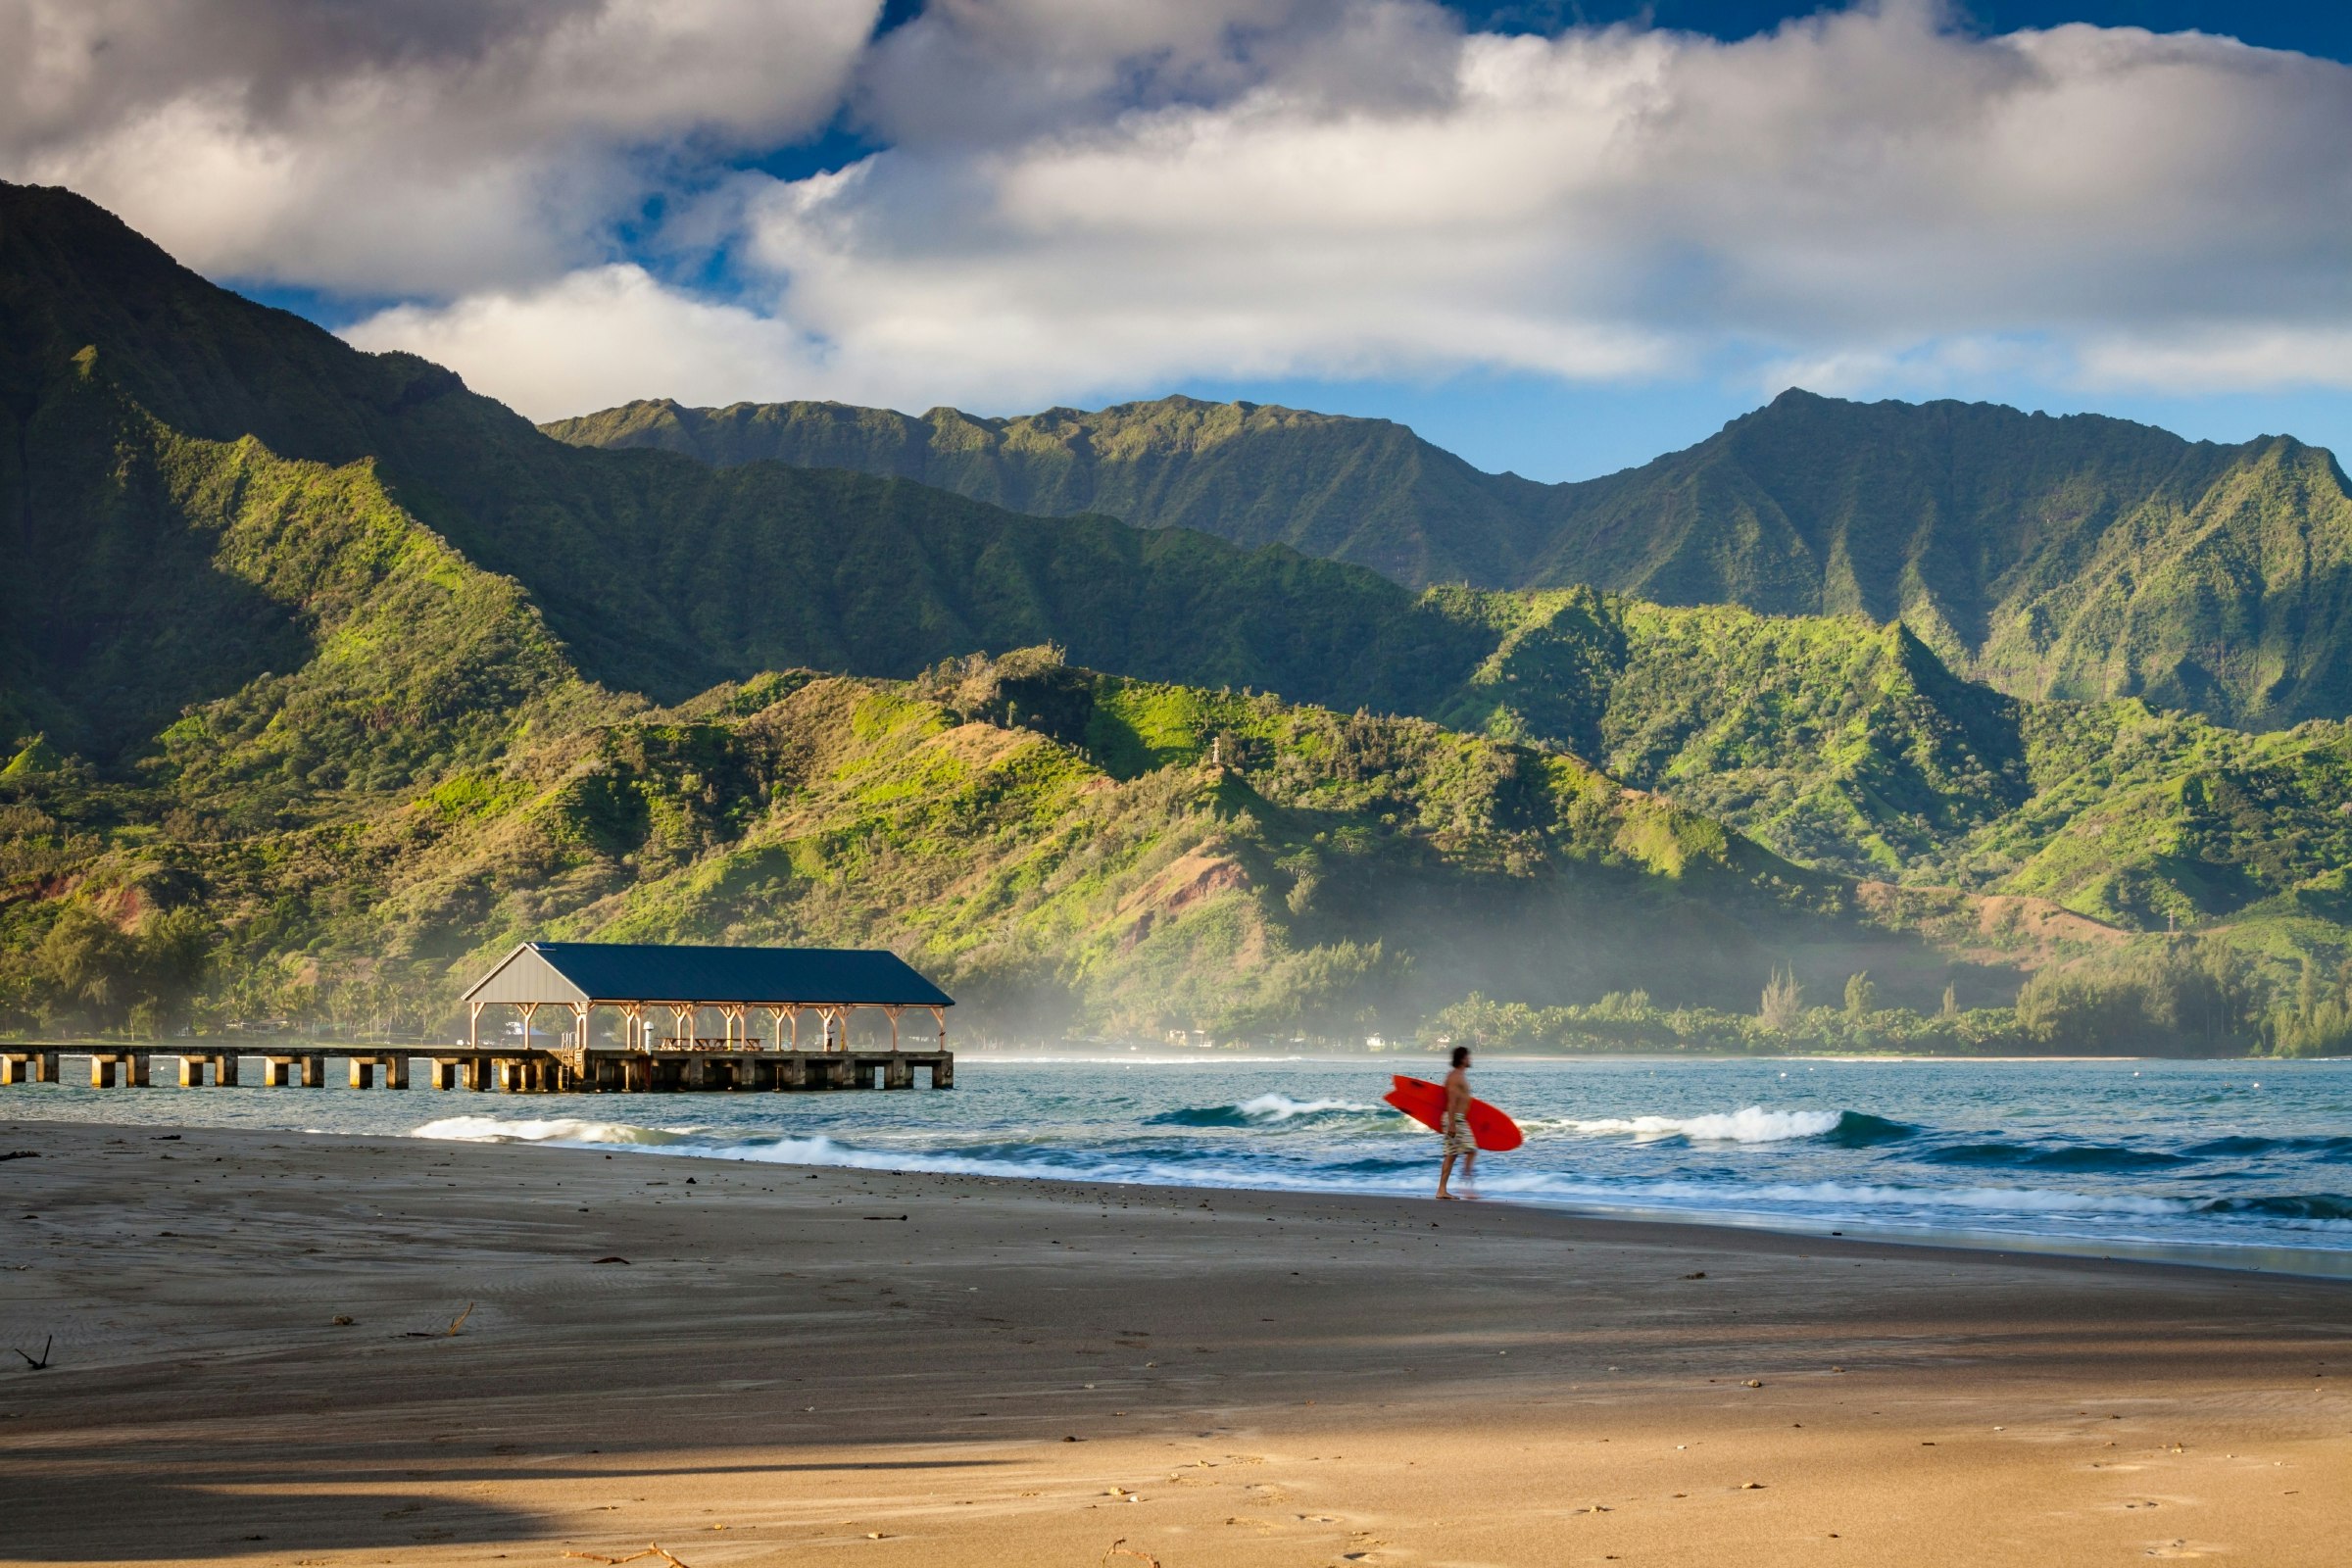 A lone surfer walks towards the water on the beach at Hanalei Bay, Hawaii.